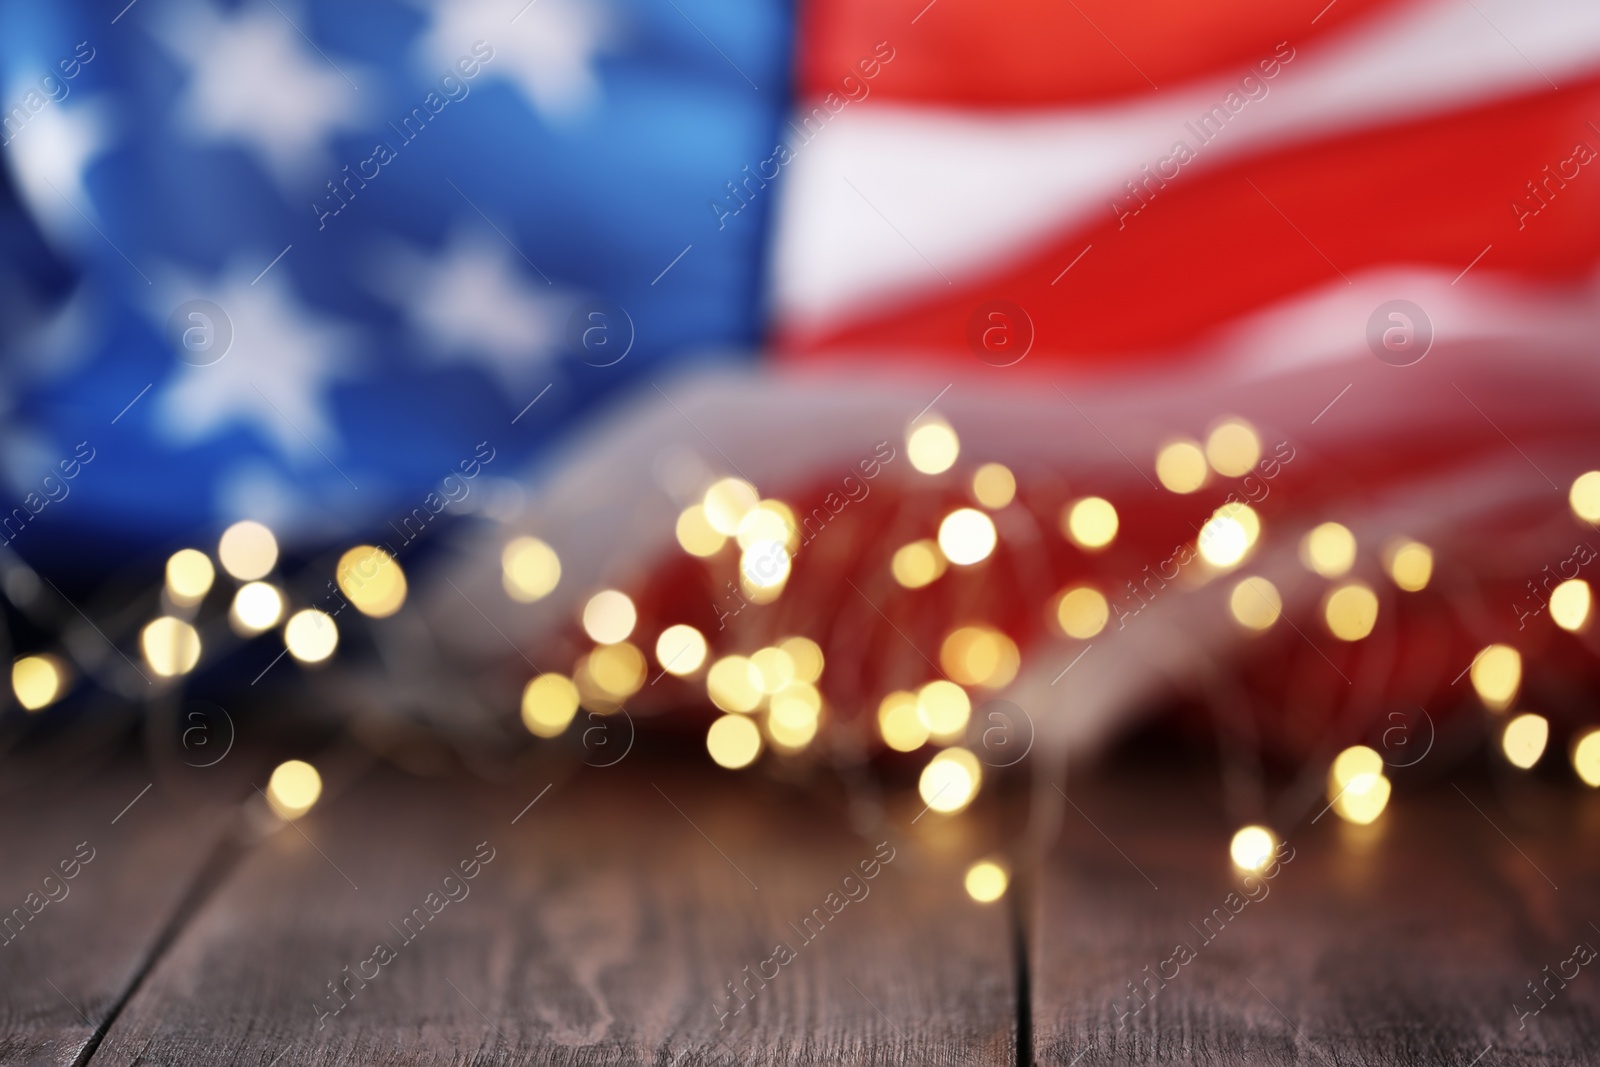 Photo of Blurred lights and American flag on wooden table. Mockup for design